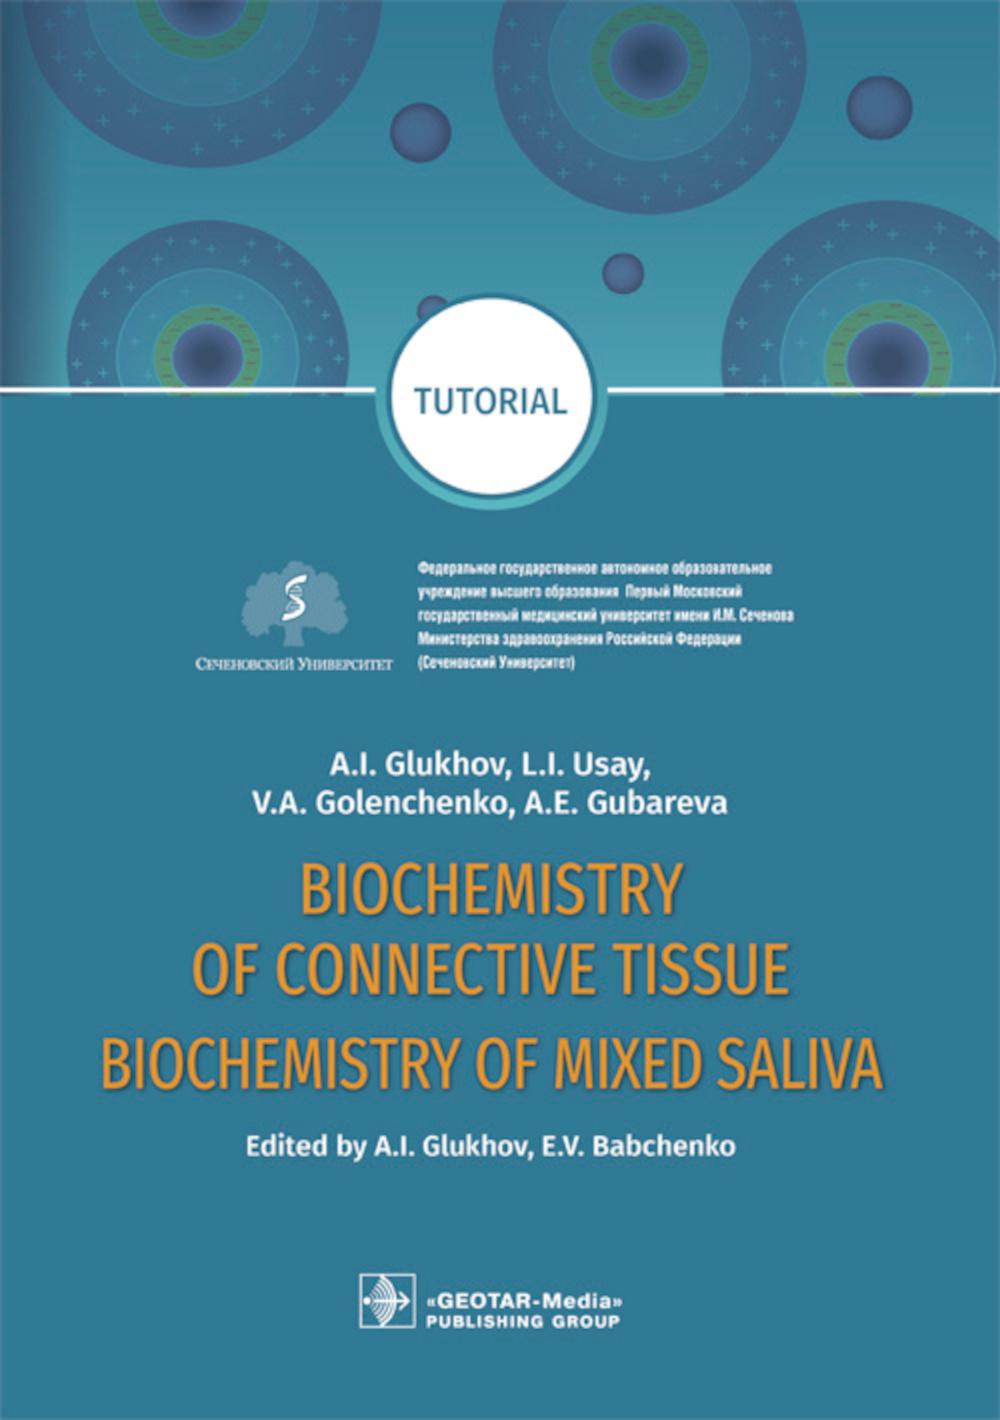 Biochemistry of the connective tissue. Biochemistry of mixed saliva : tutorial / ed. By A. I. Glukhov, E. V. Babchenko.  M. : GEOTAR-Media, 2019.  128 pages with illustrations.